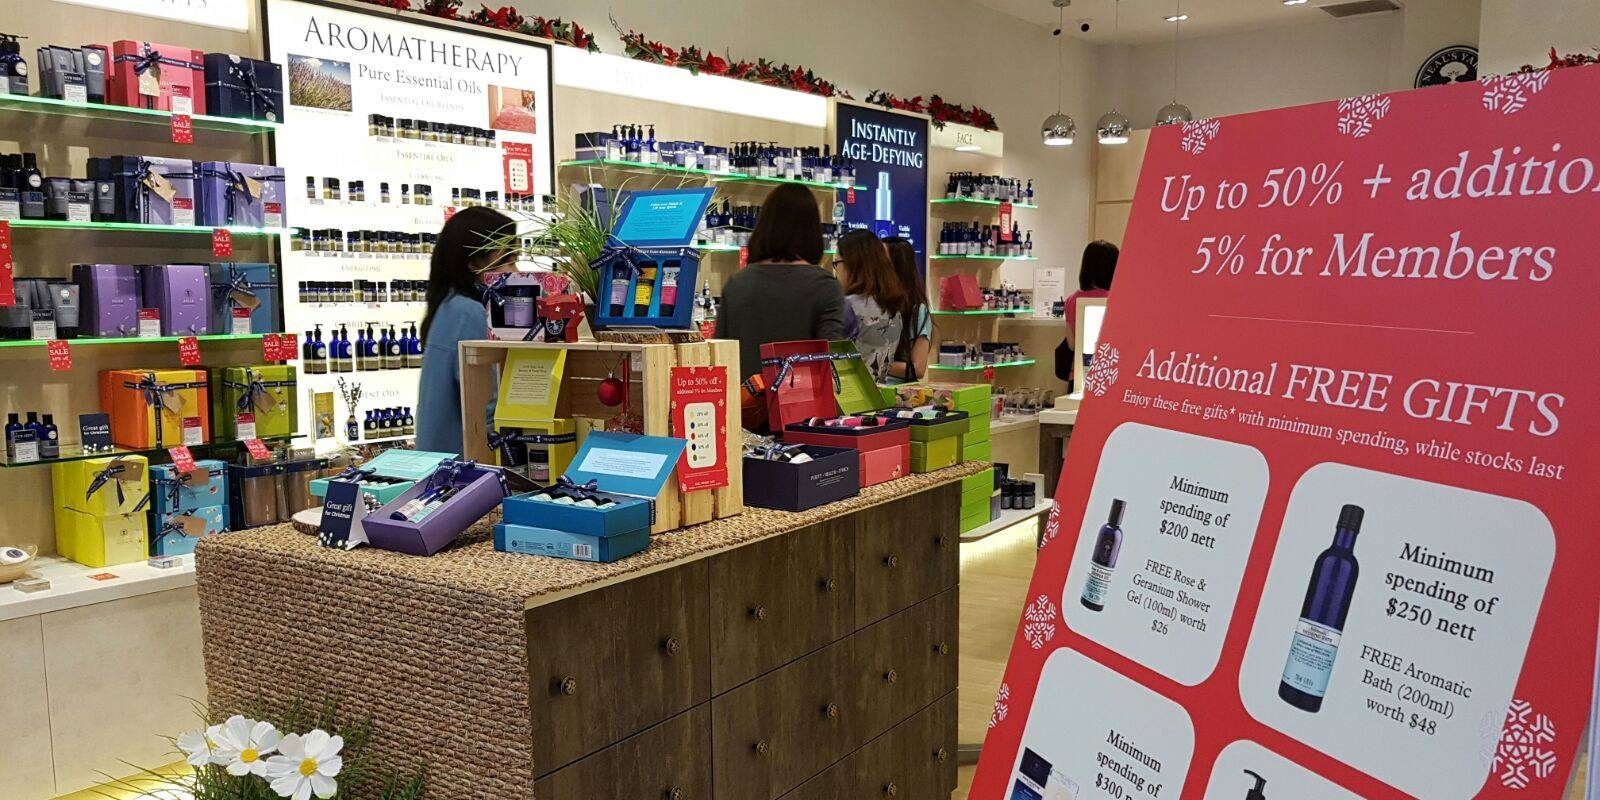 Neal’s Yard Remedies Singapore Pre-Christmas Gift Sale 50% Off Promotion 12-13 Nov 2016